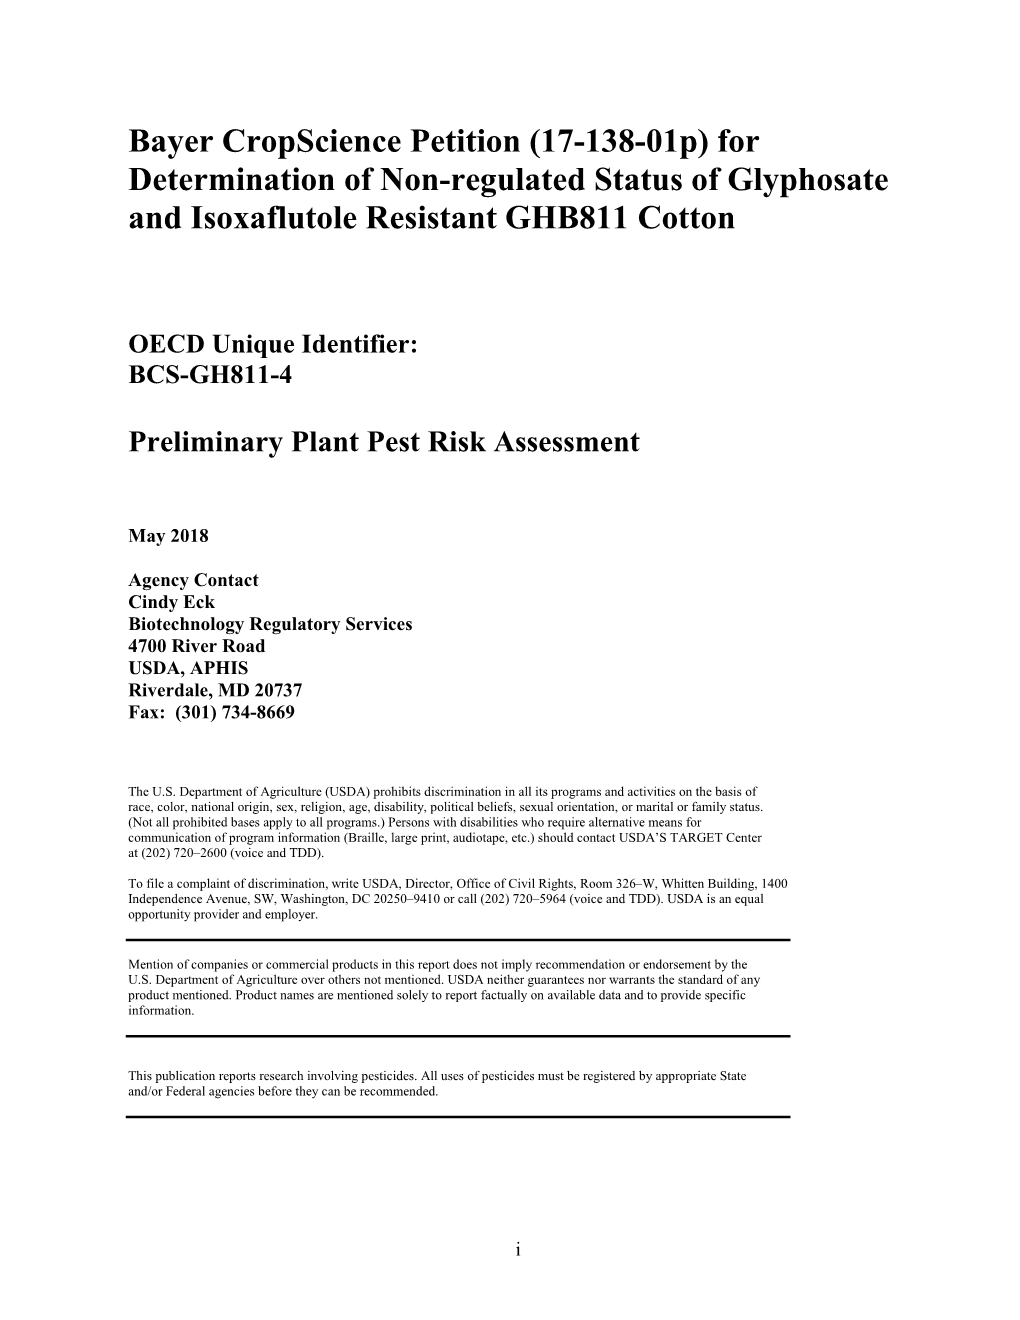 Bayer Cropscience Petition (17-138-01P) for Determination of Non-Regulated Status of Glyphosate and Isoxaflutole Resistant GHB811 Cotton